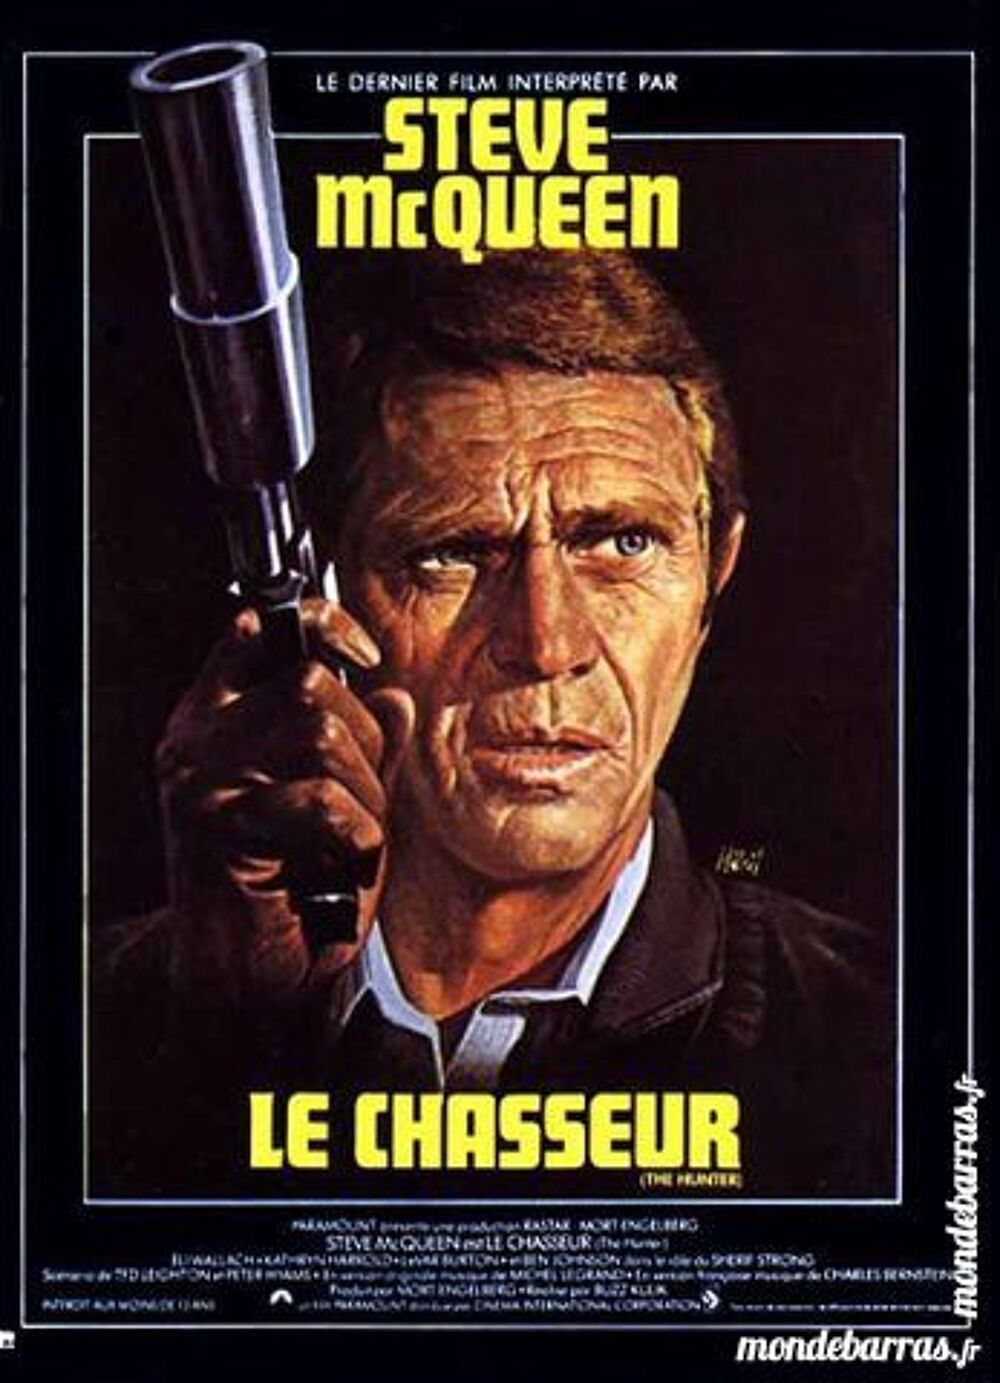 Dvd: Le Chasseur (252) DVD et blu-ray